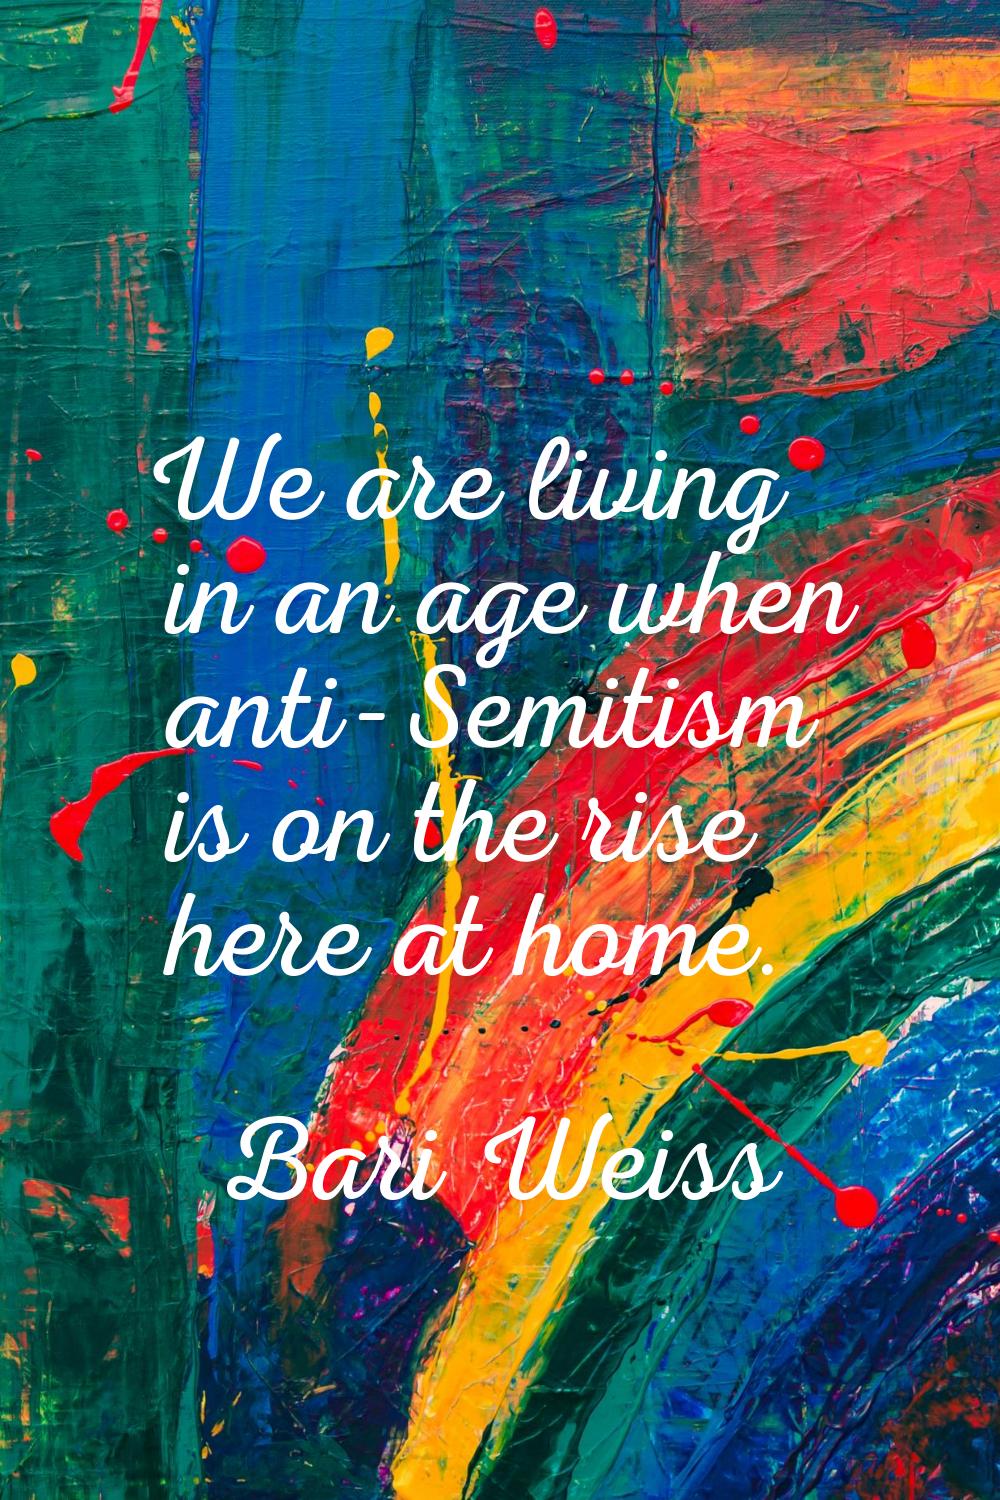 We are living in an age when anti-Semitism is on the rise here at home.